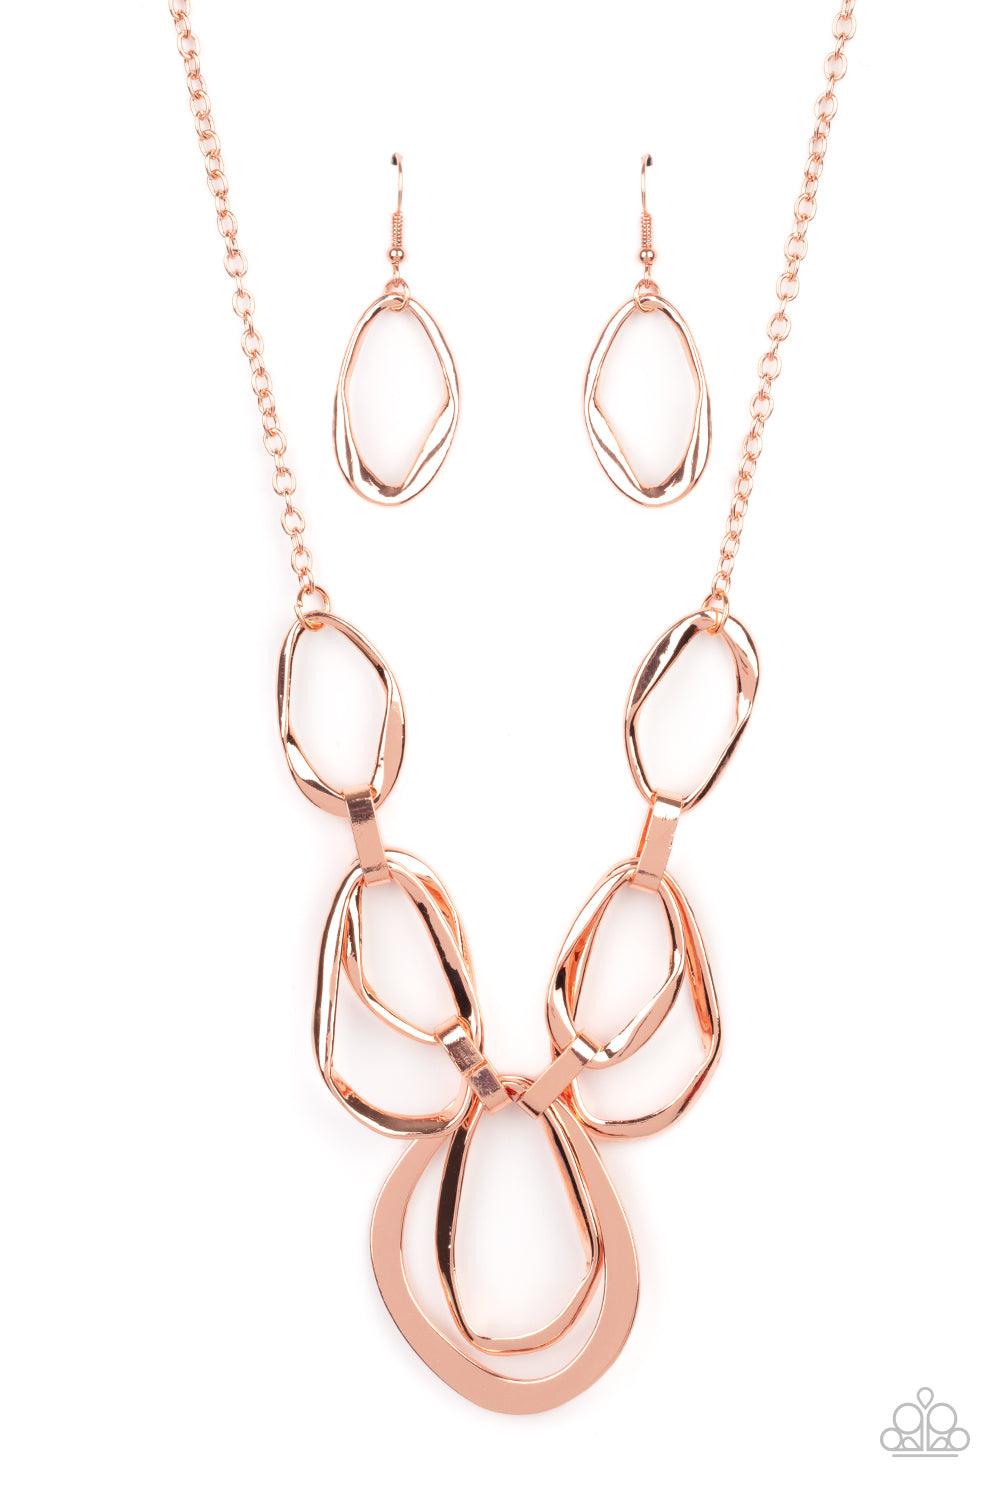 Paparazzi Accessories Prehistoric Heirloom - Copper An asymmetrical assortment of twisted and flattened shiny copper rings delicately link below the collar with oversized shiny copper fittings, creating an intense industrial display below the collar. Feat